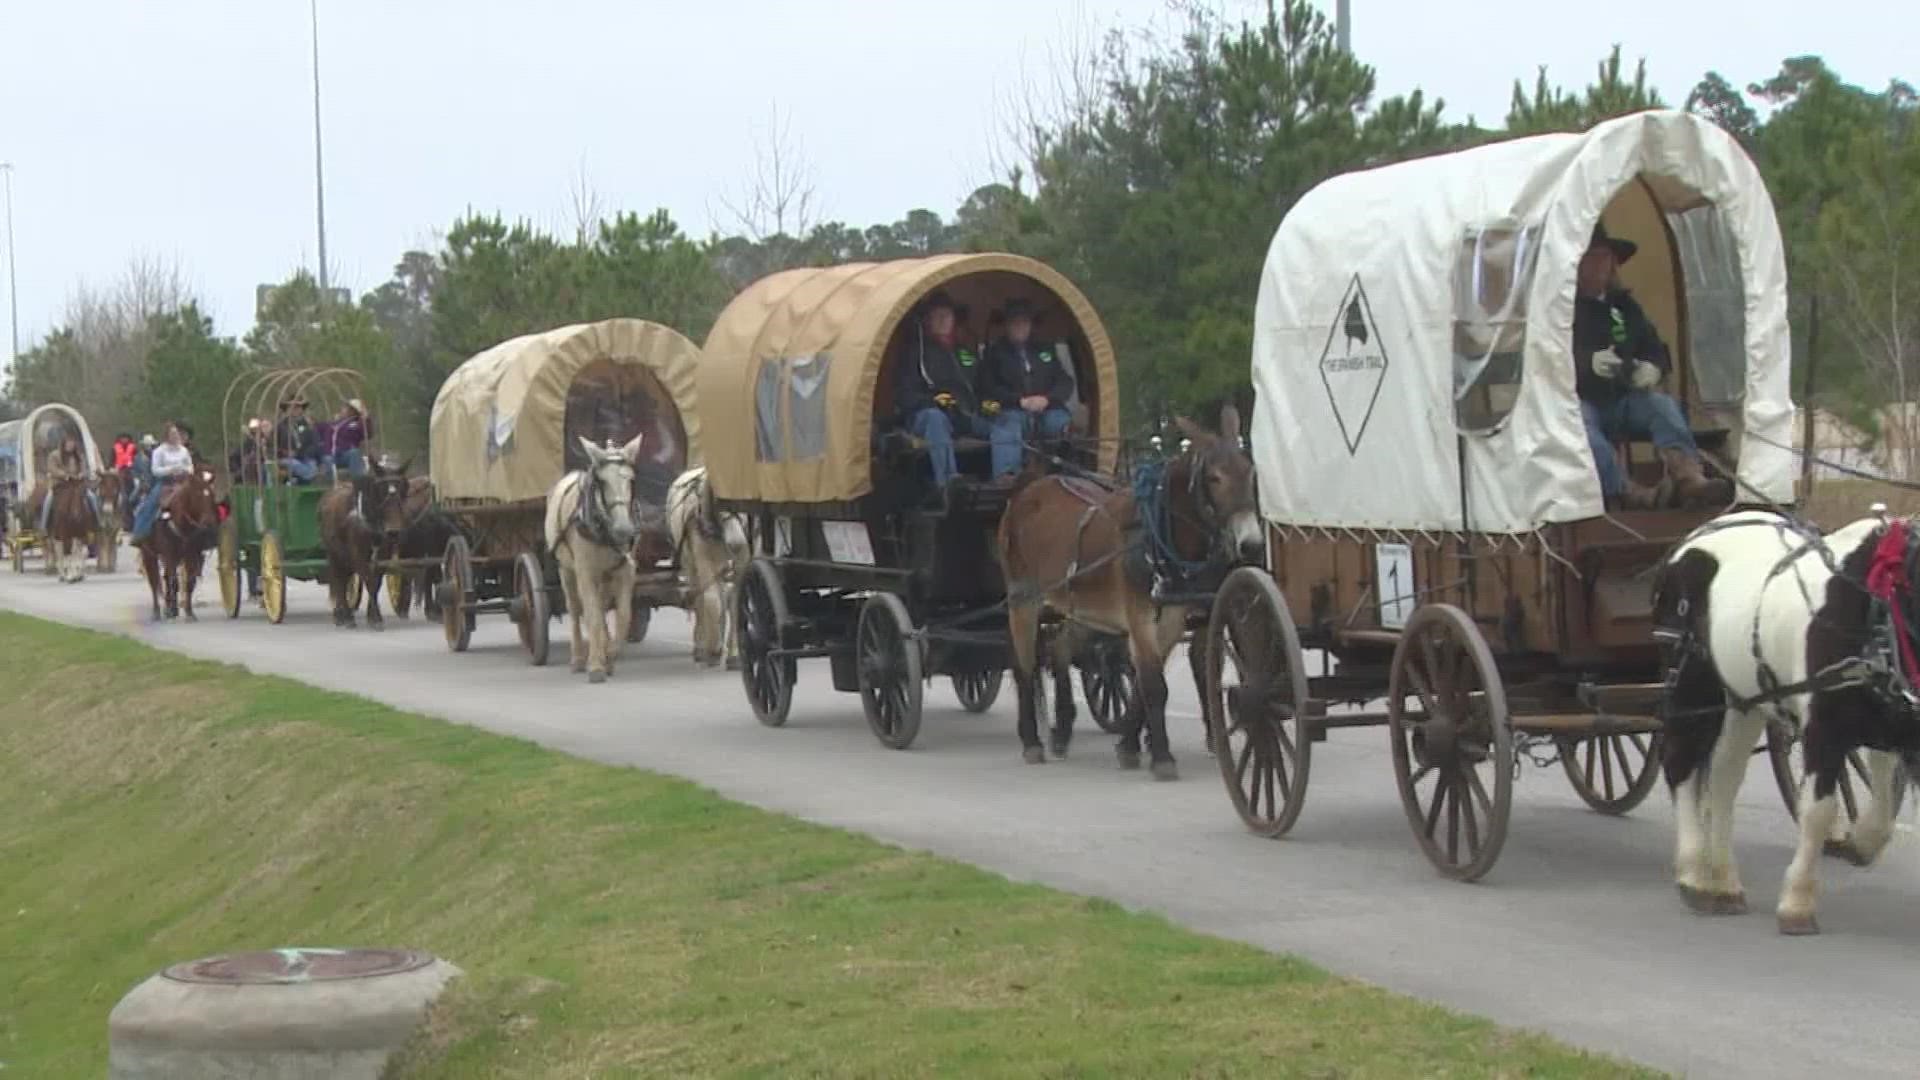 Ten trail rides are arriving in Houston this week from all over the state as part of the annual tradition to kick off the Houston Livestock Show and Rodeo.